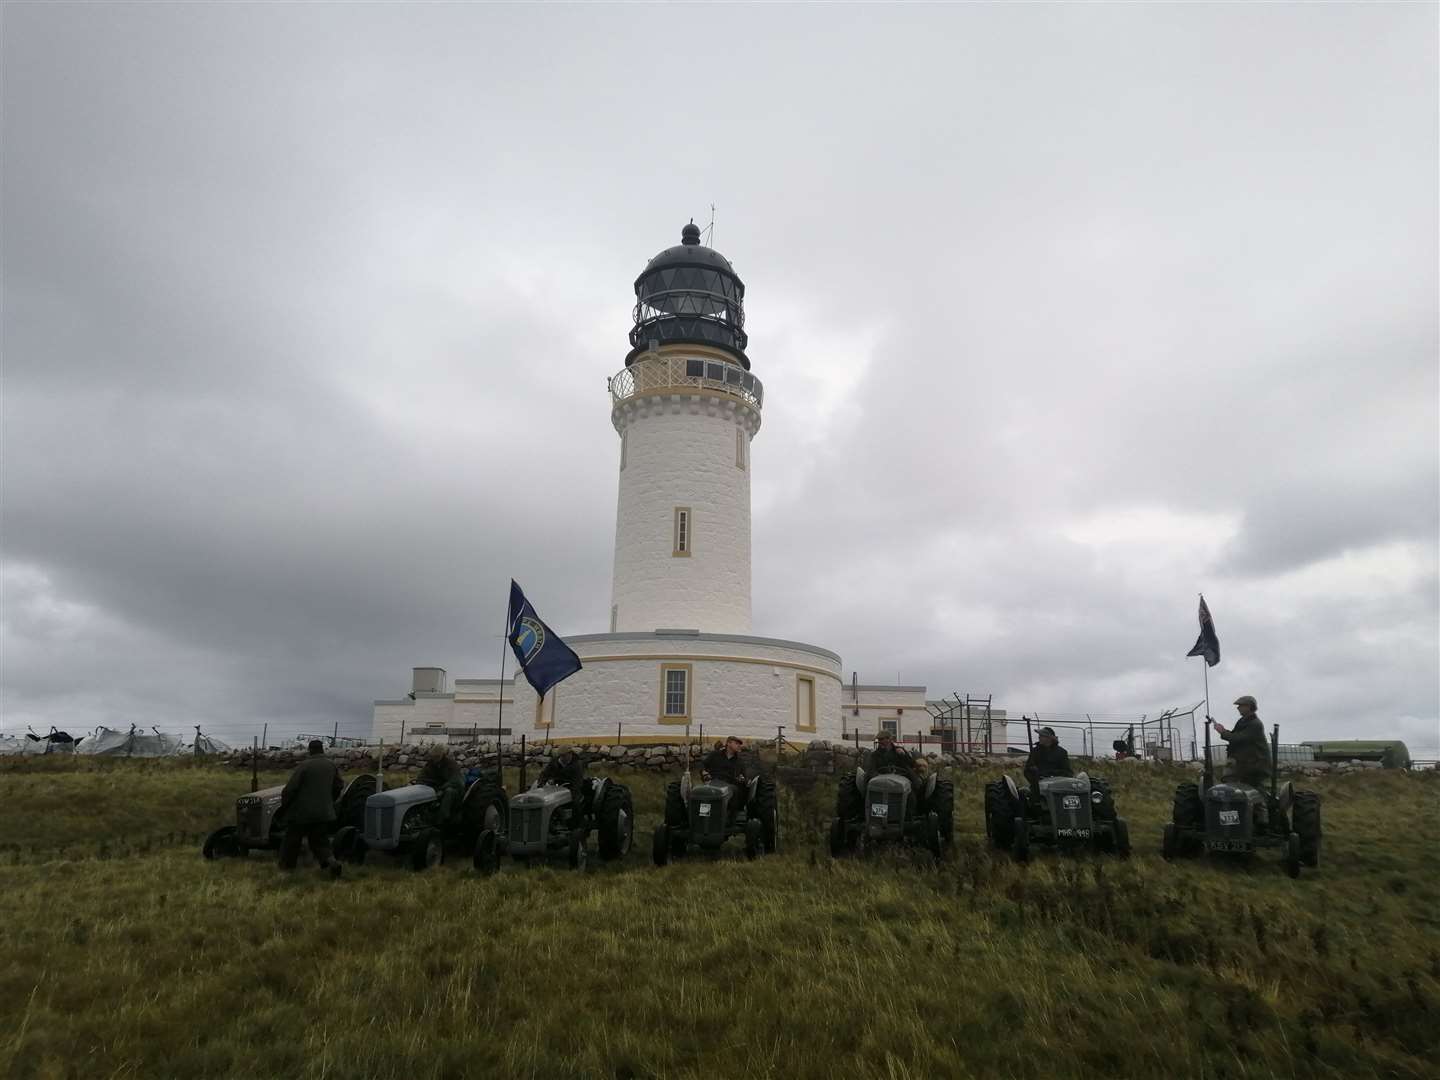 The tractors line up at the lighthouse.